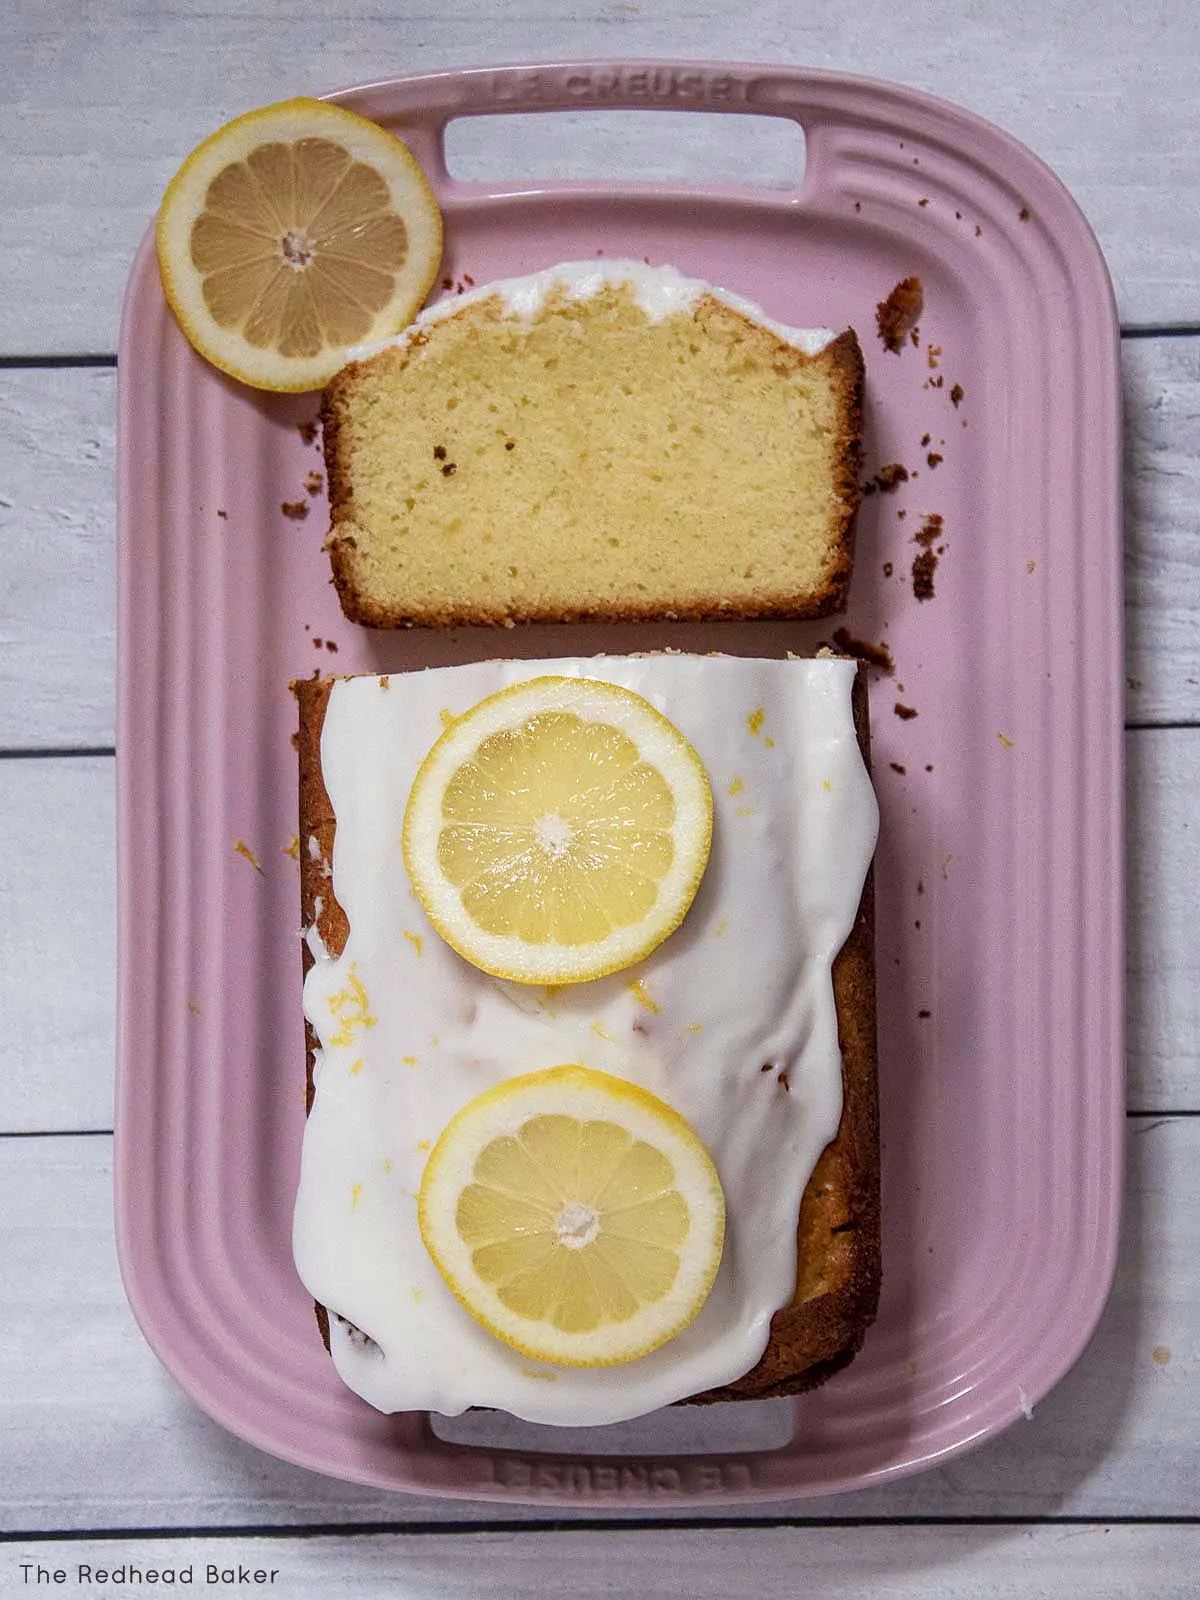 An overhead view of a pound cake on a pink serving tray with one cut slice laying down.